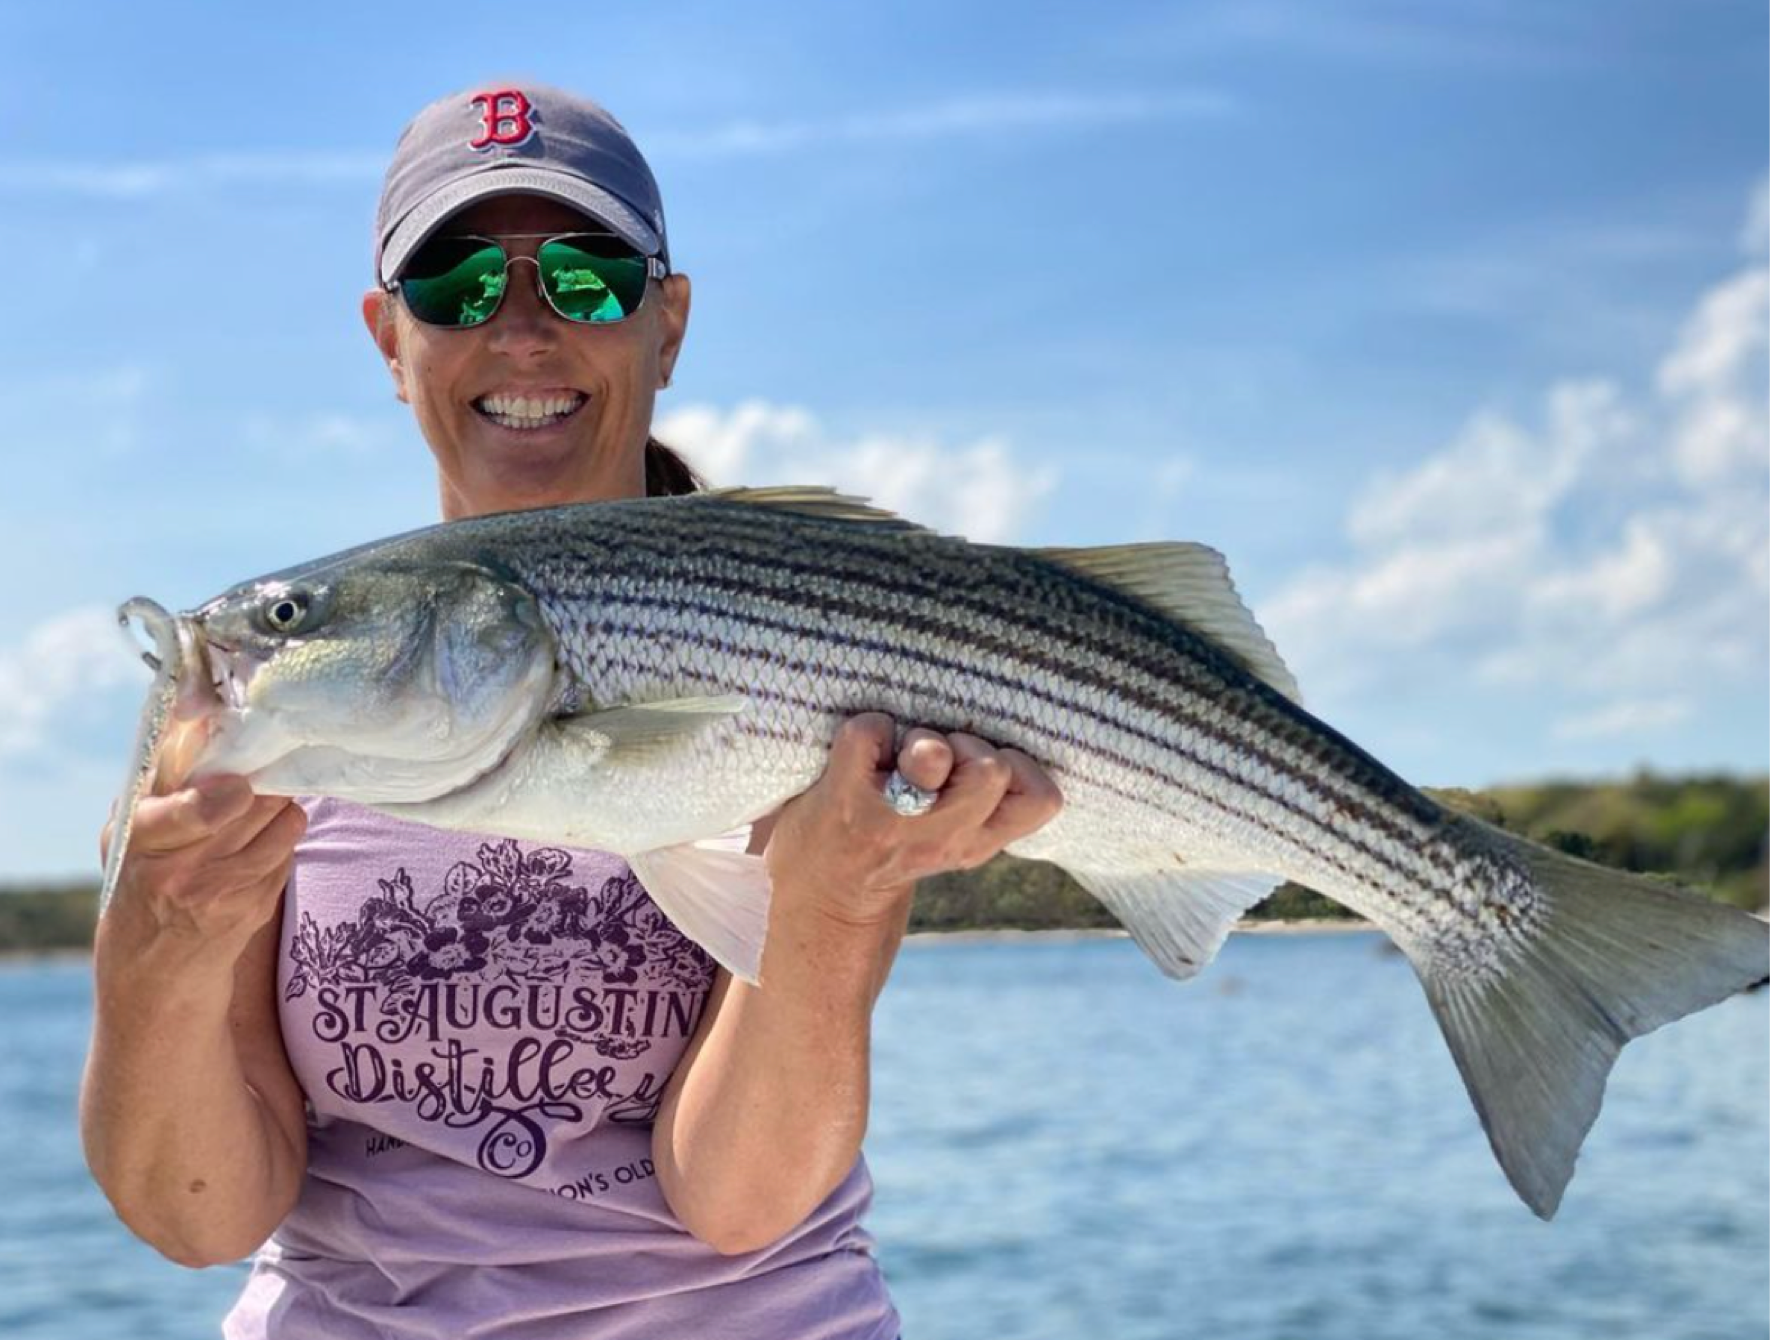 Cape Fishing Charters Fishing Charter in Falmouth MA| Private 4 to 6 Hour Charter Trip fishing Offshore